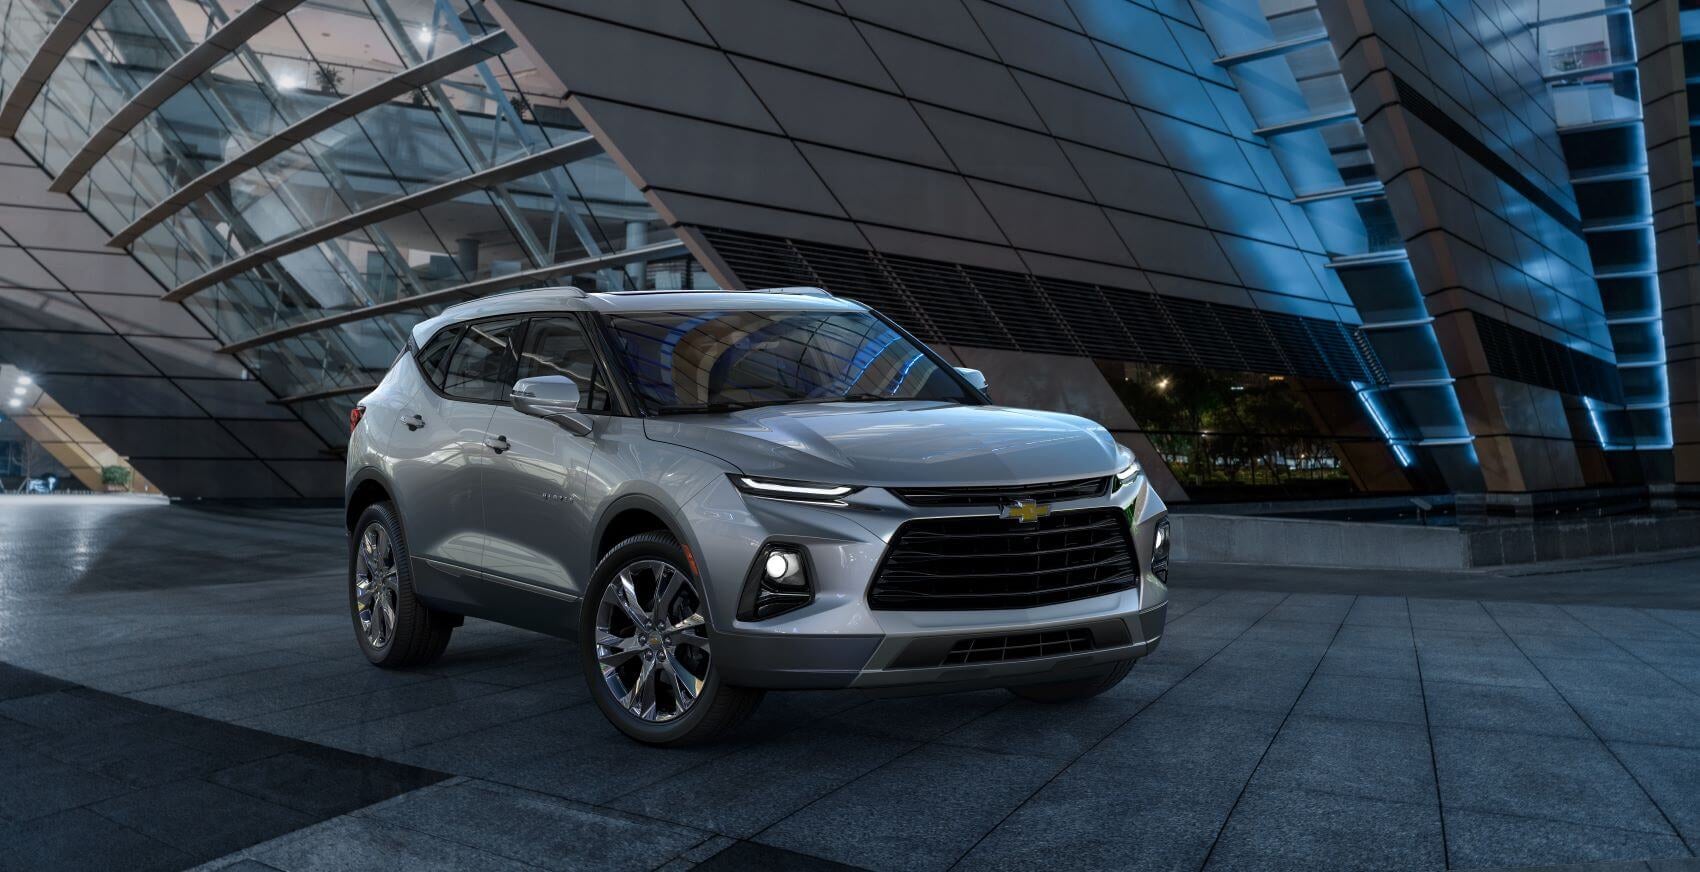 2022 Chevy Blazer in Gray Outside of Building